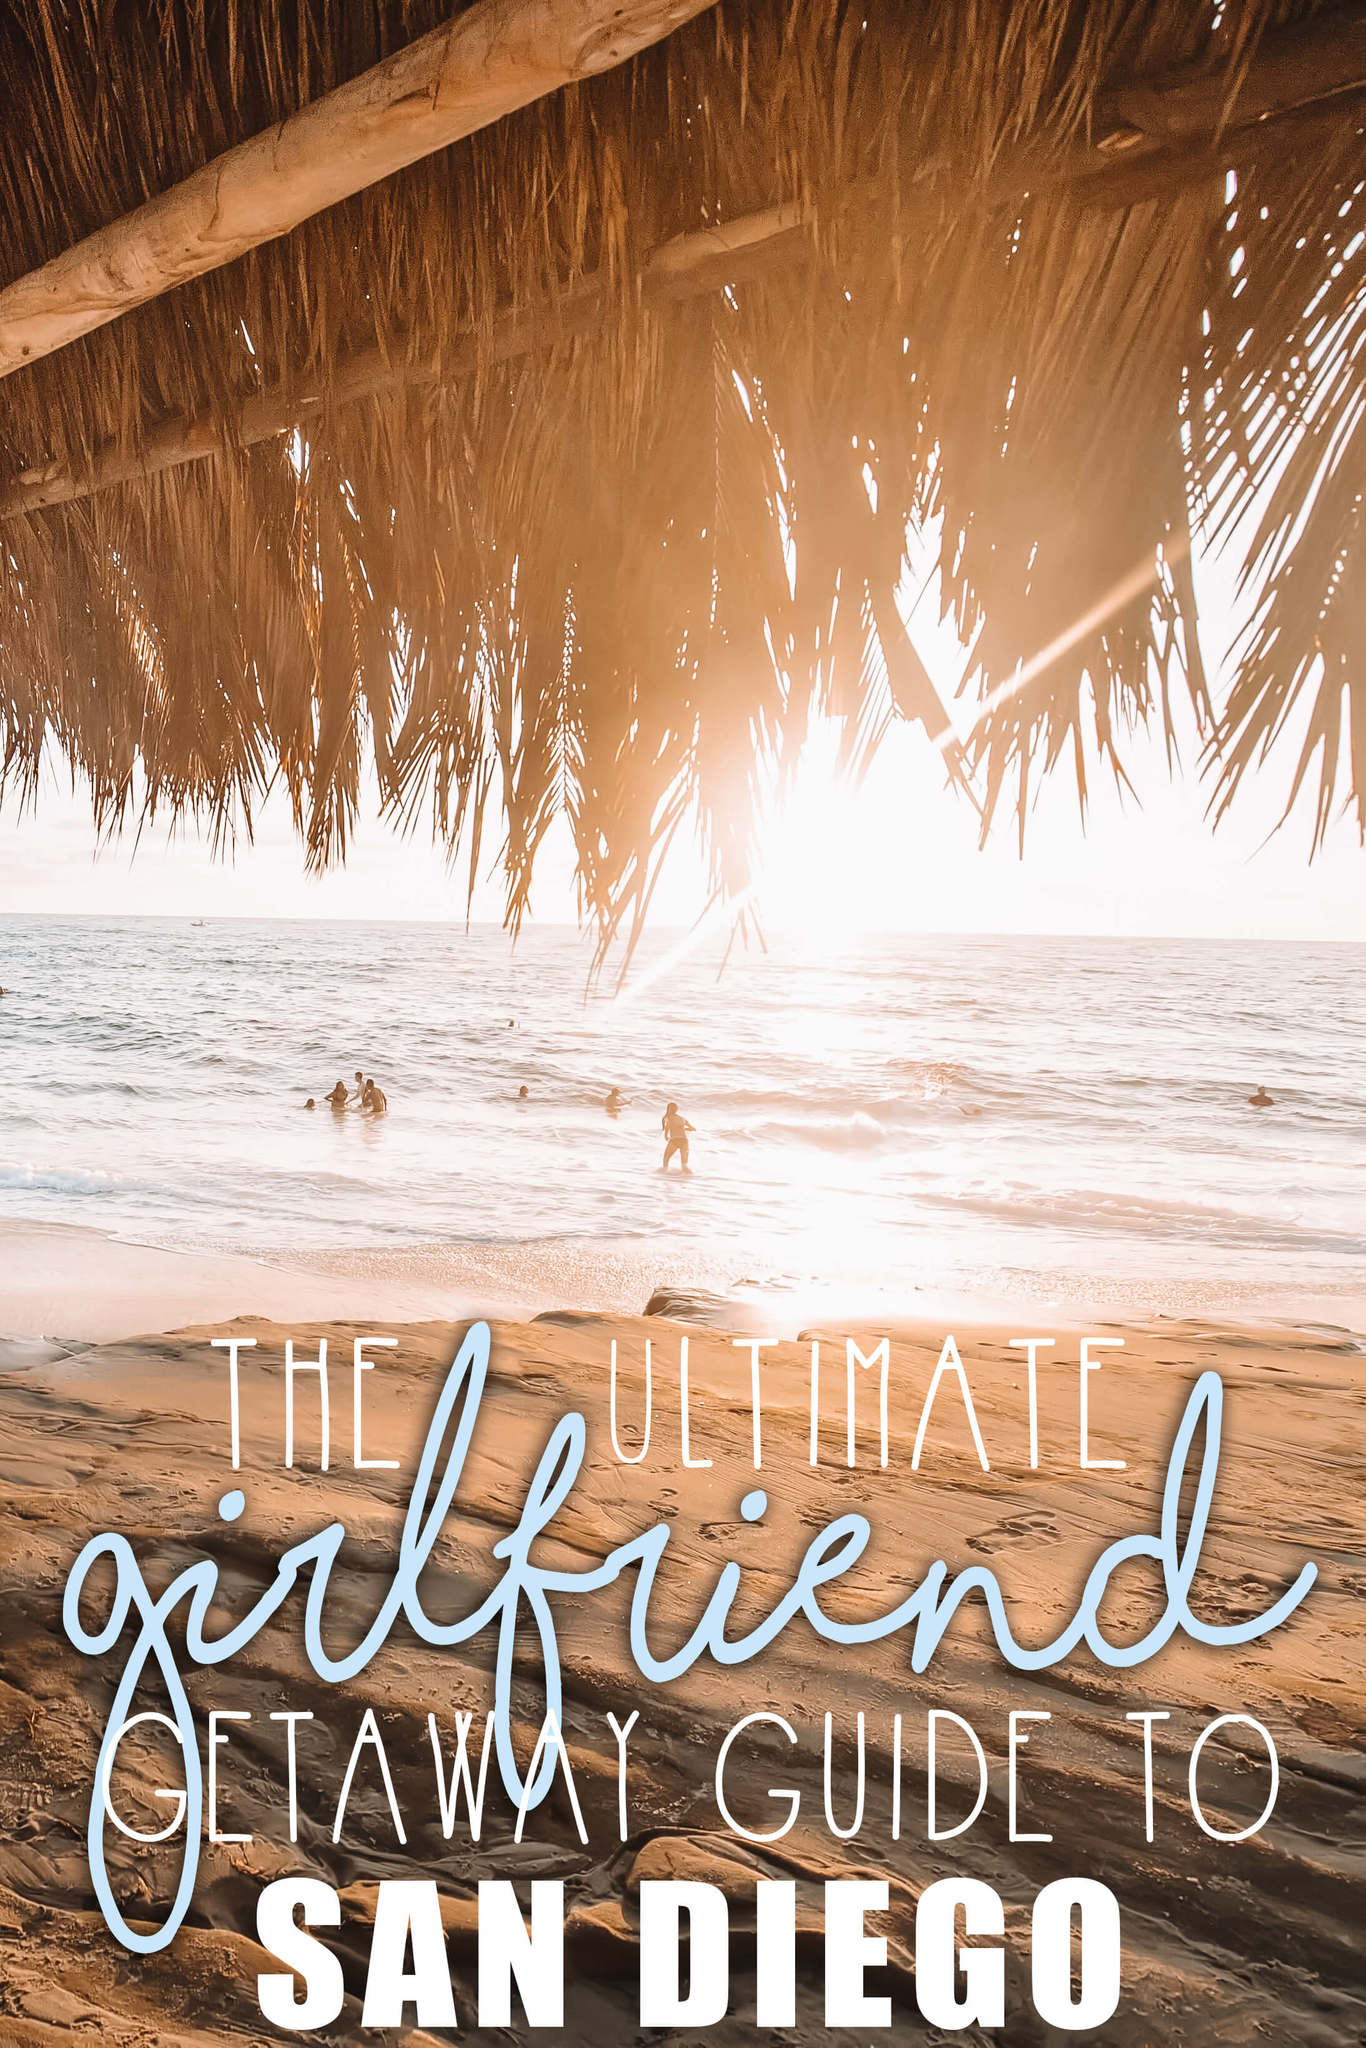 The-ultimate-girlfriend-guide-to-san-diego